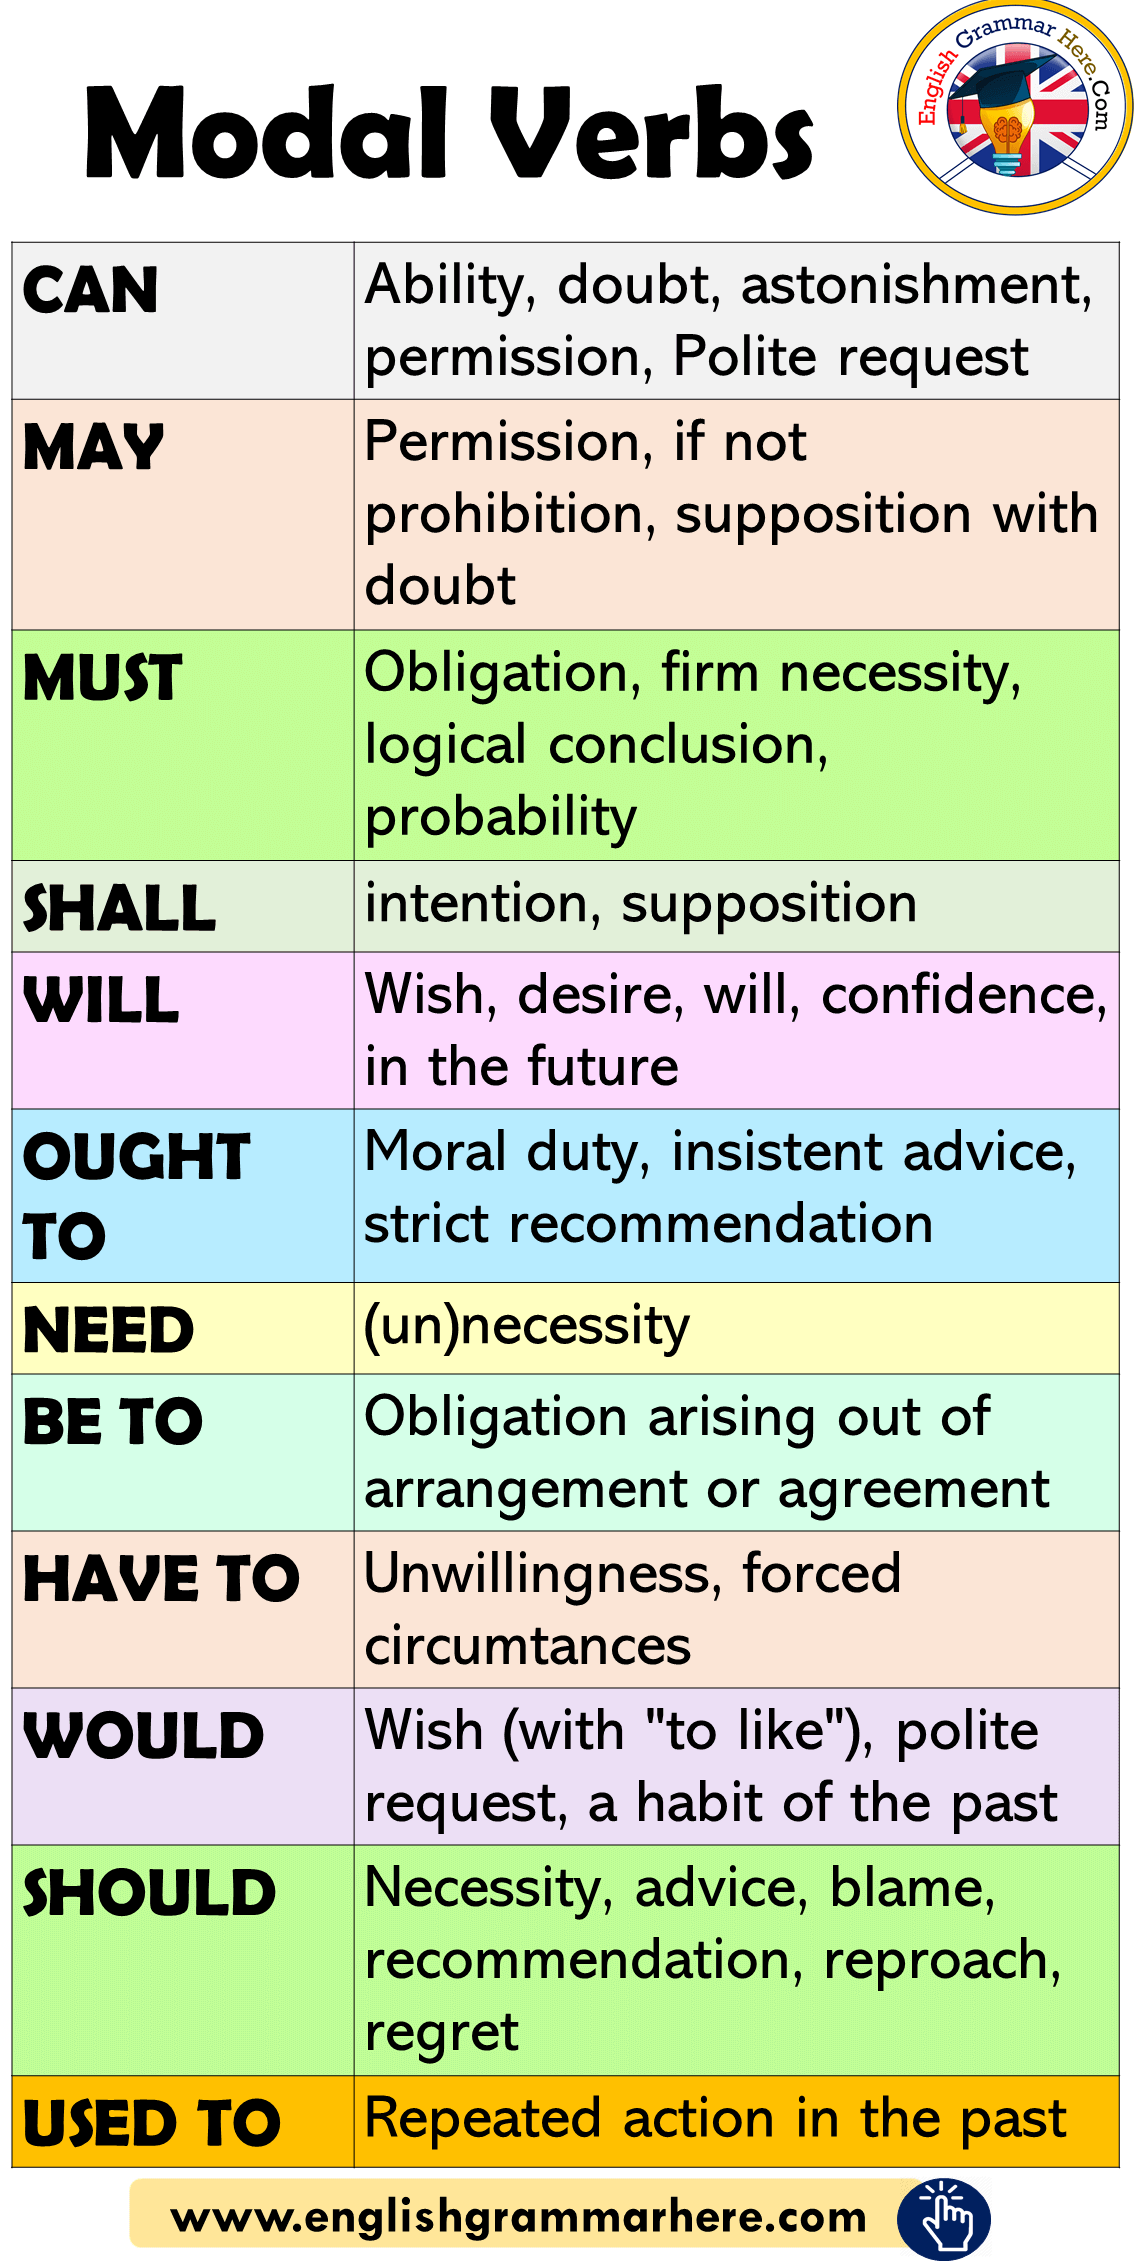 Modal Verbs in English, How to Use Modals